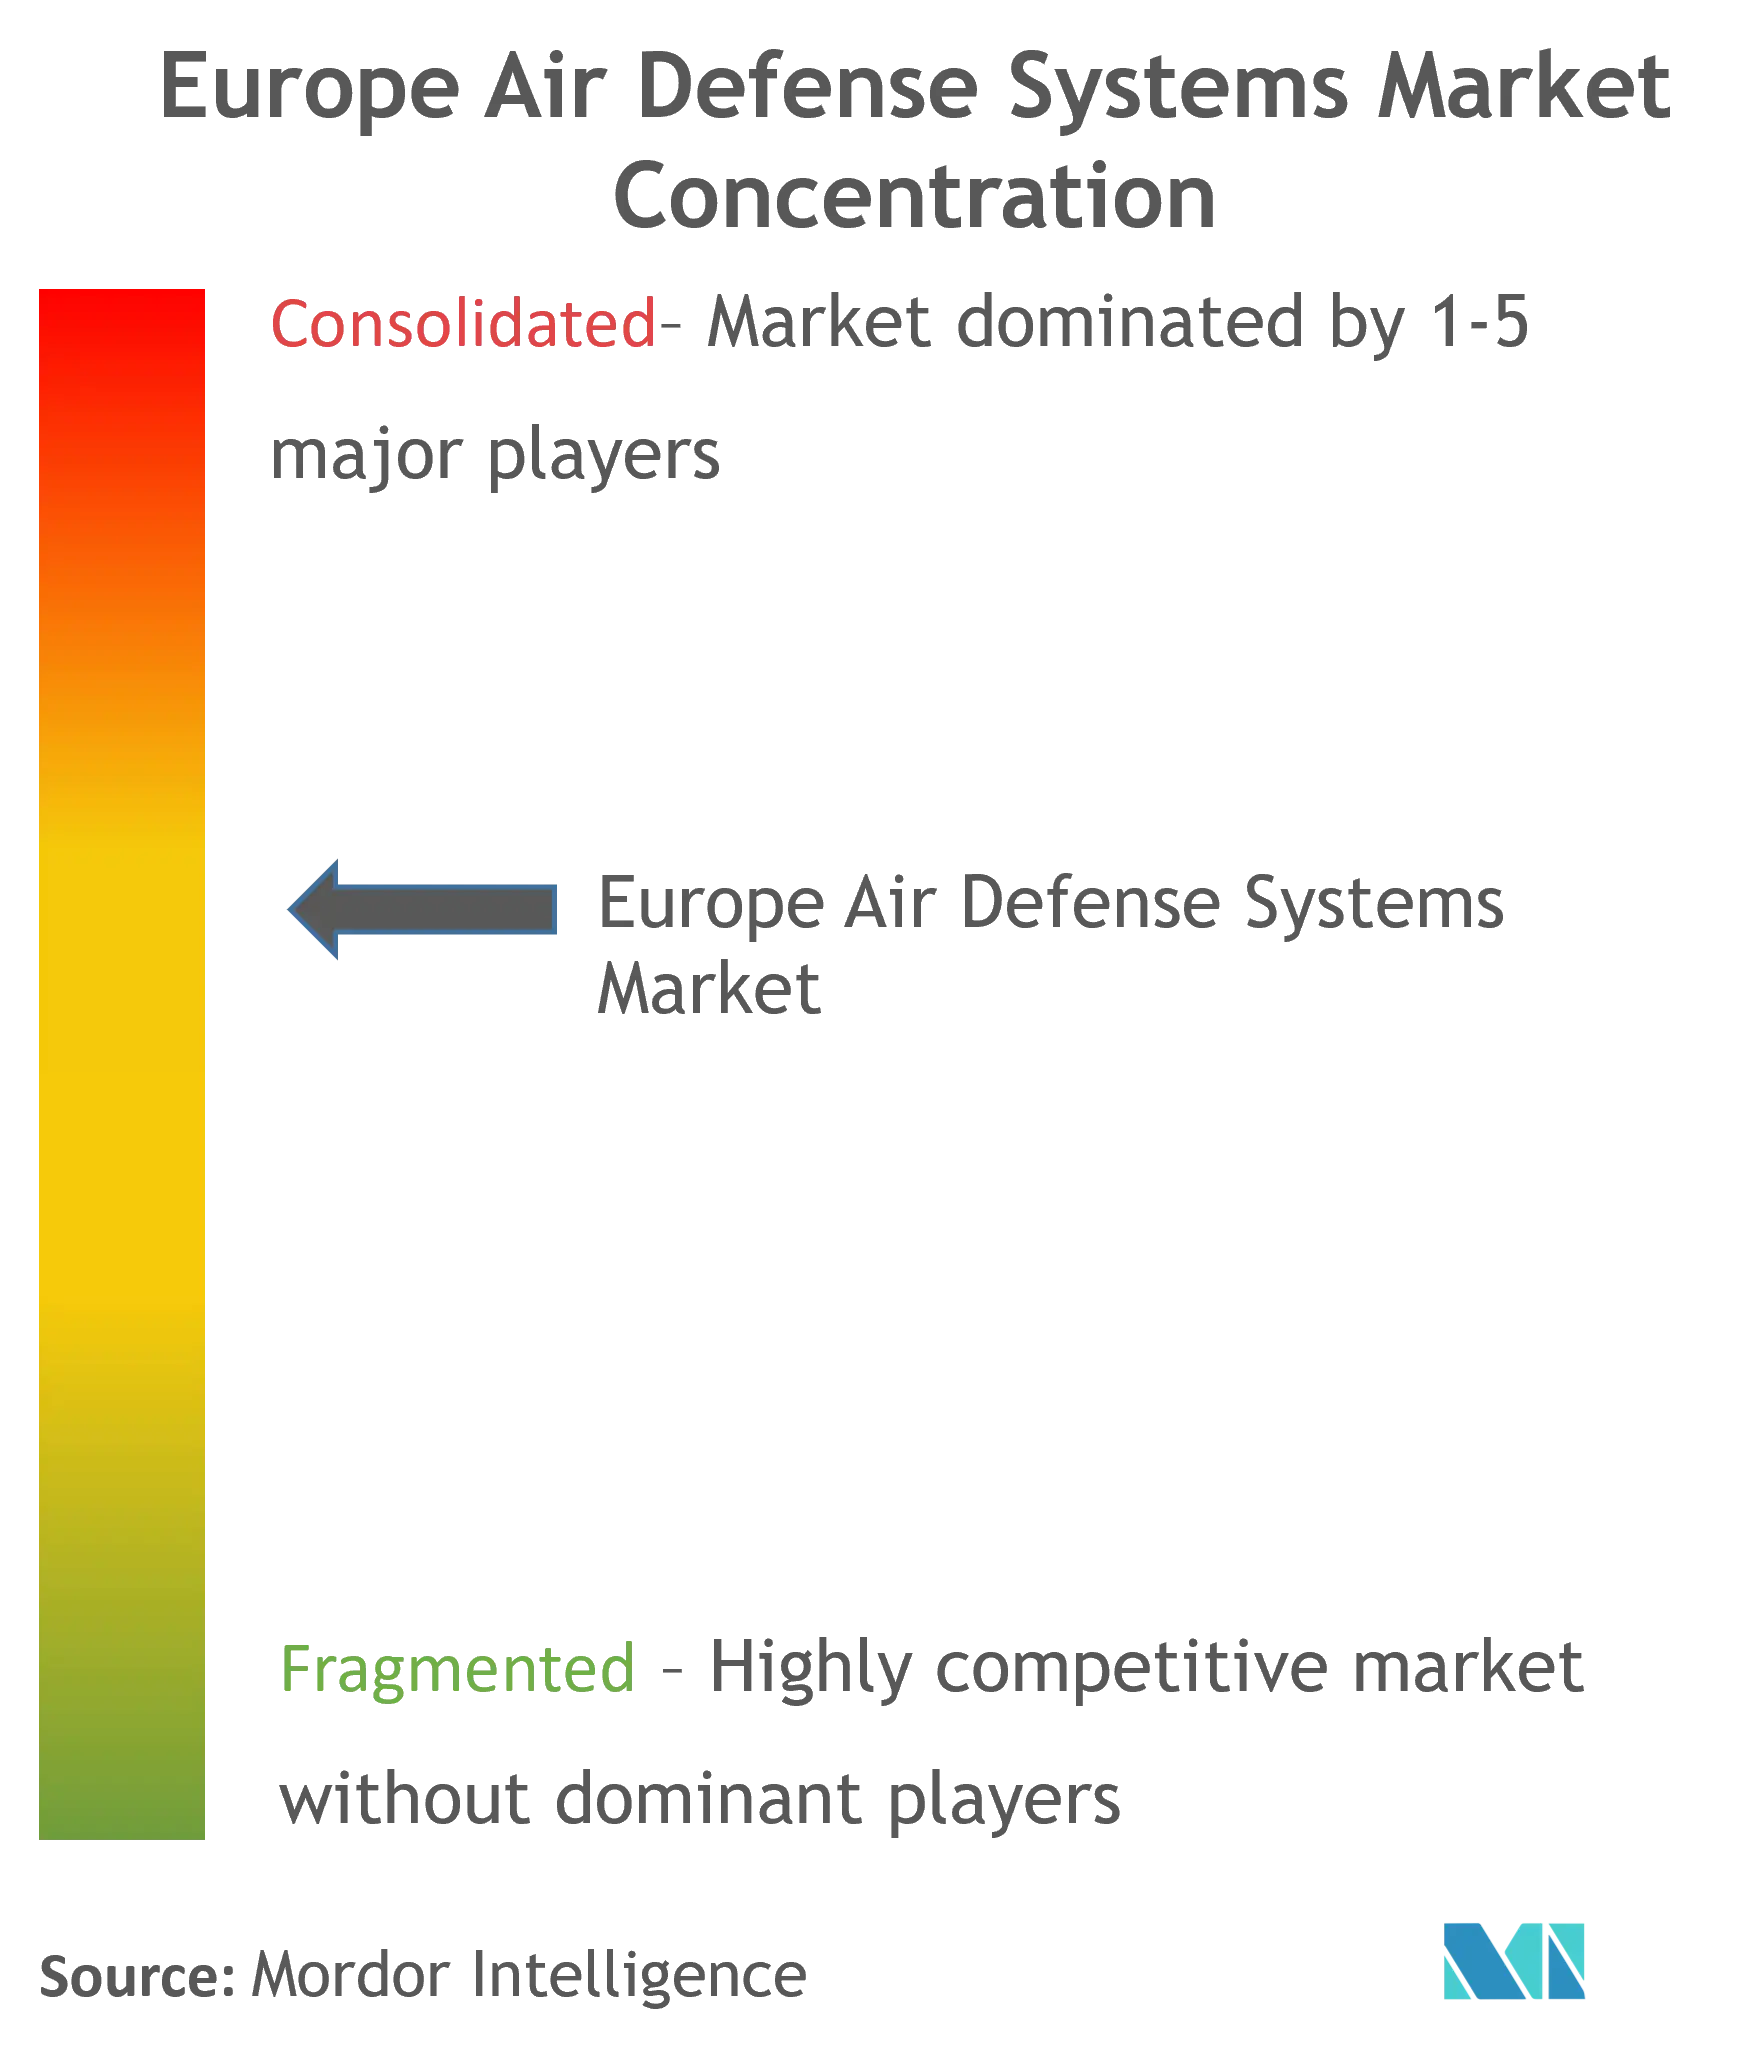 Europe Air Defense Systems Market Concentration